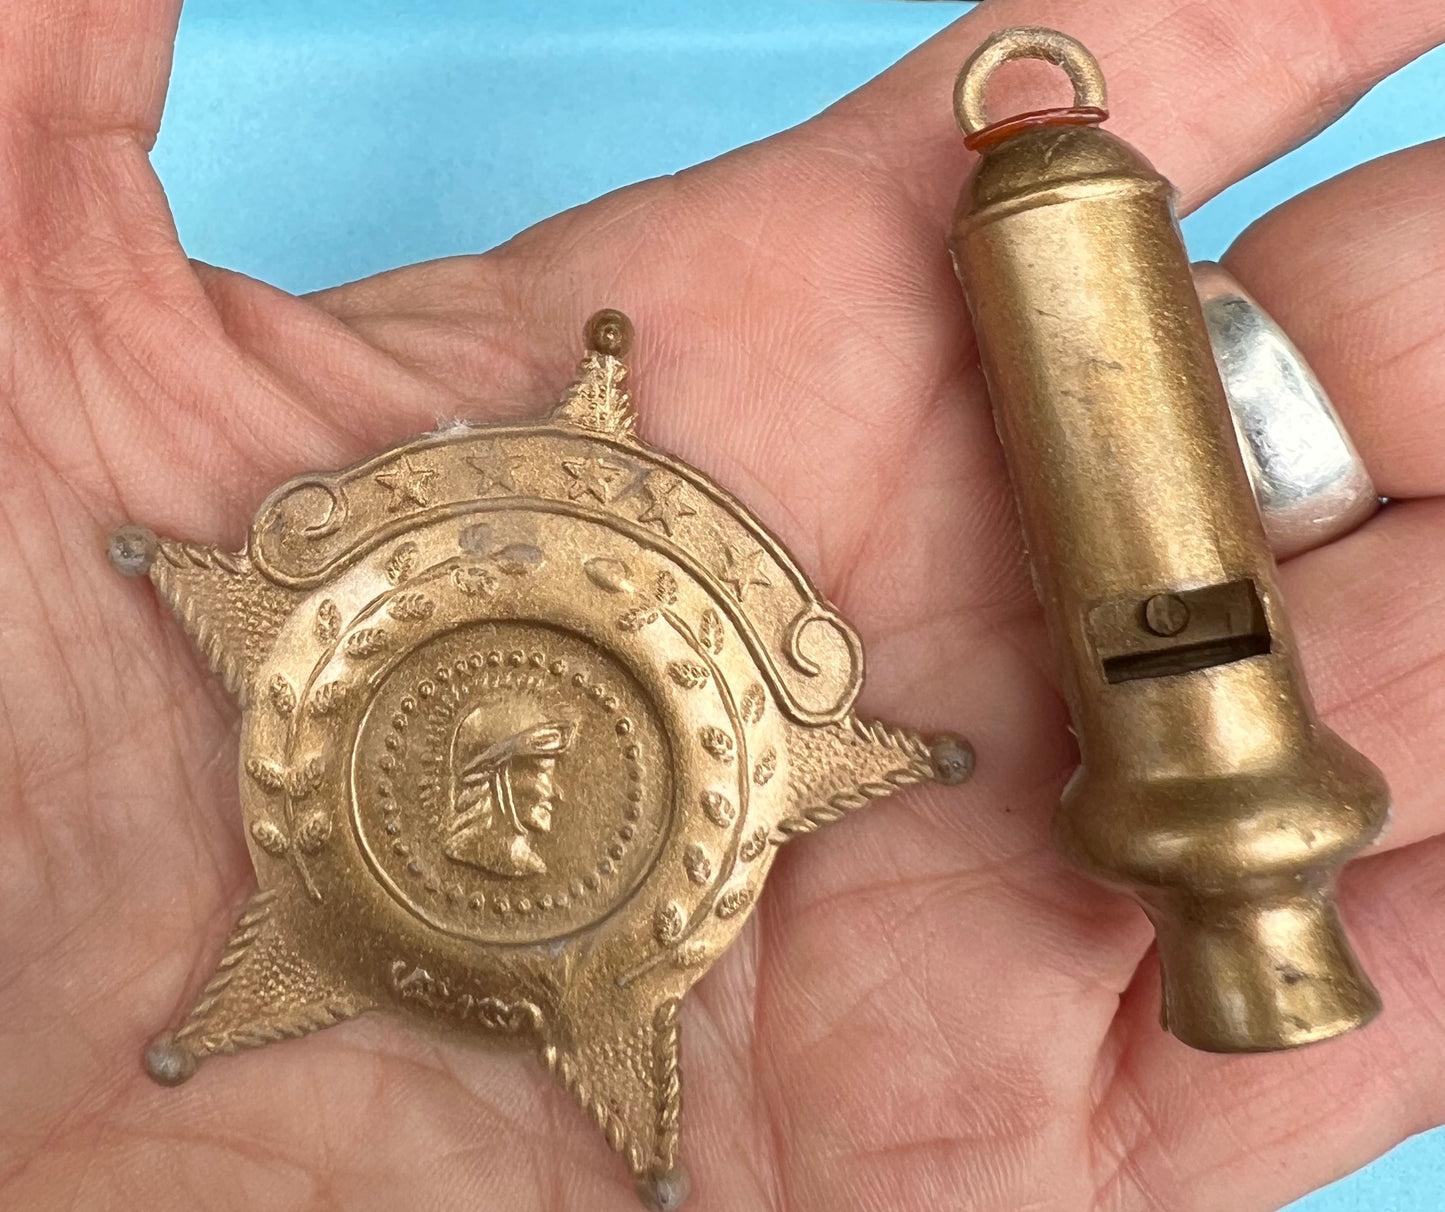 15 Vintage Police Badge and Whistle Sets